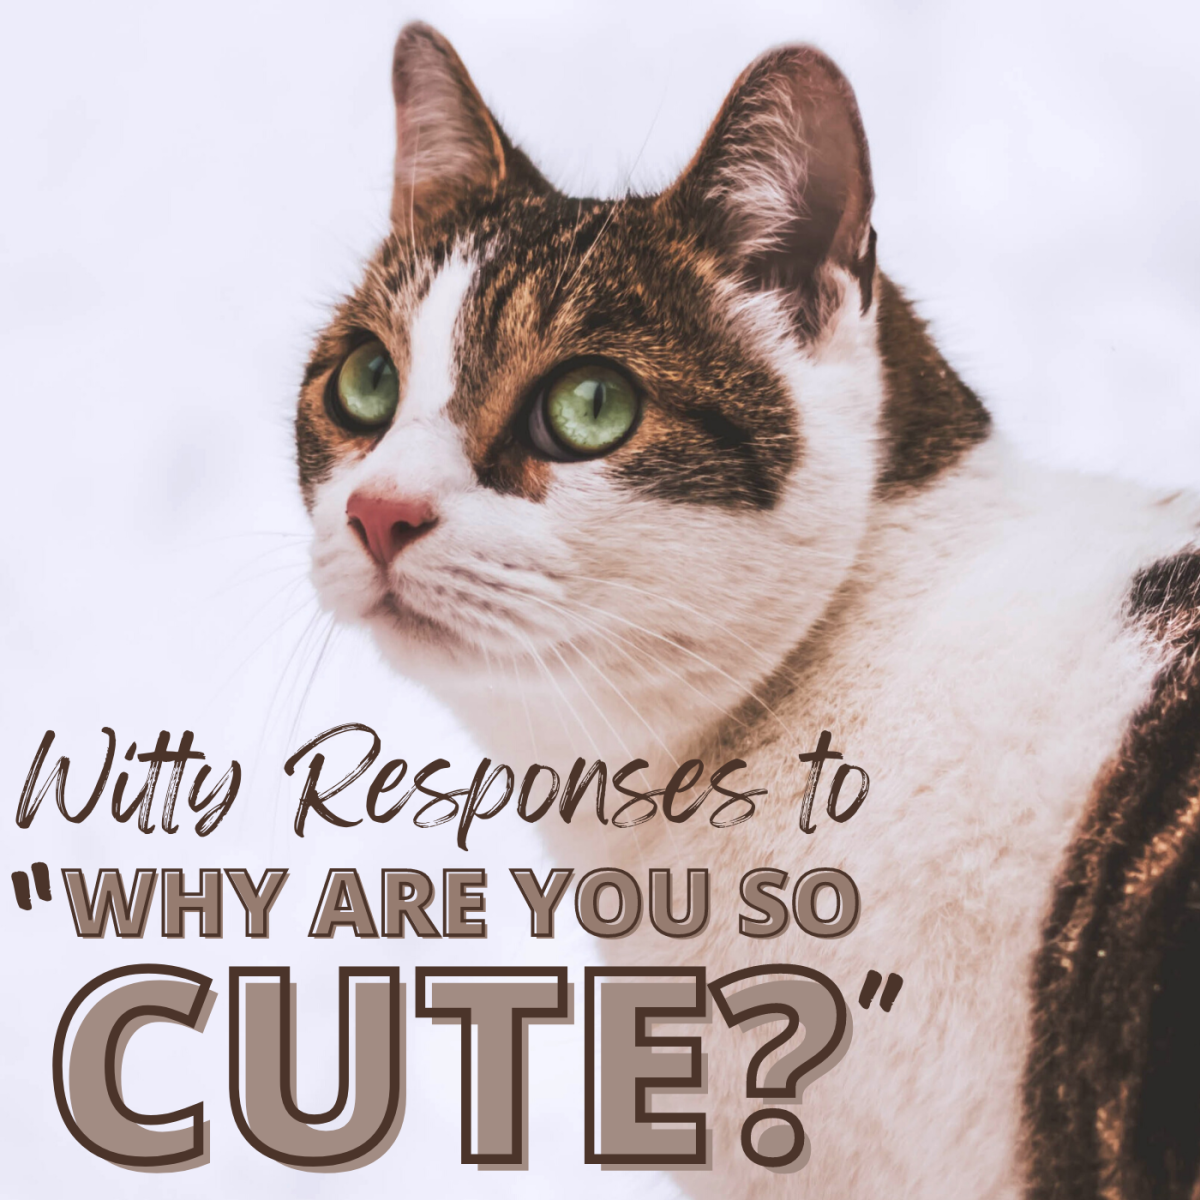 Cat got your tongue when someone compliments you? Try one of these creative answers to the question "Why are you so cute?"